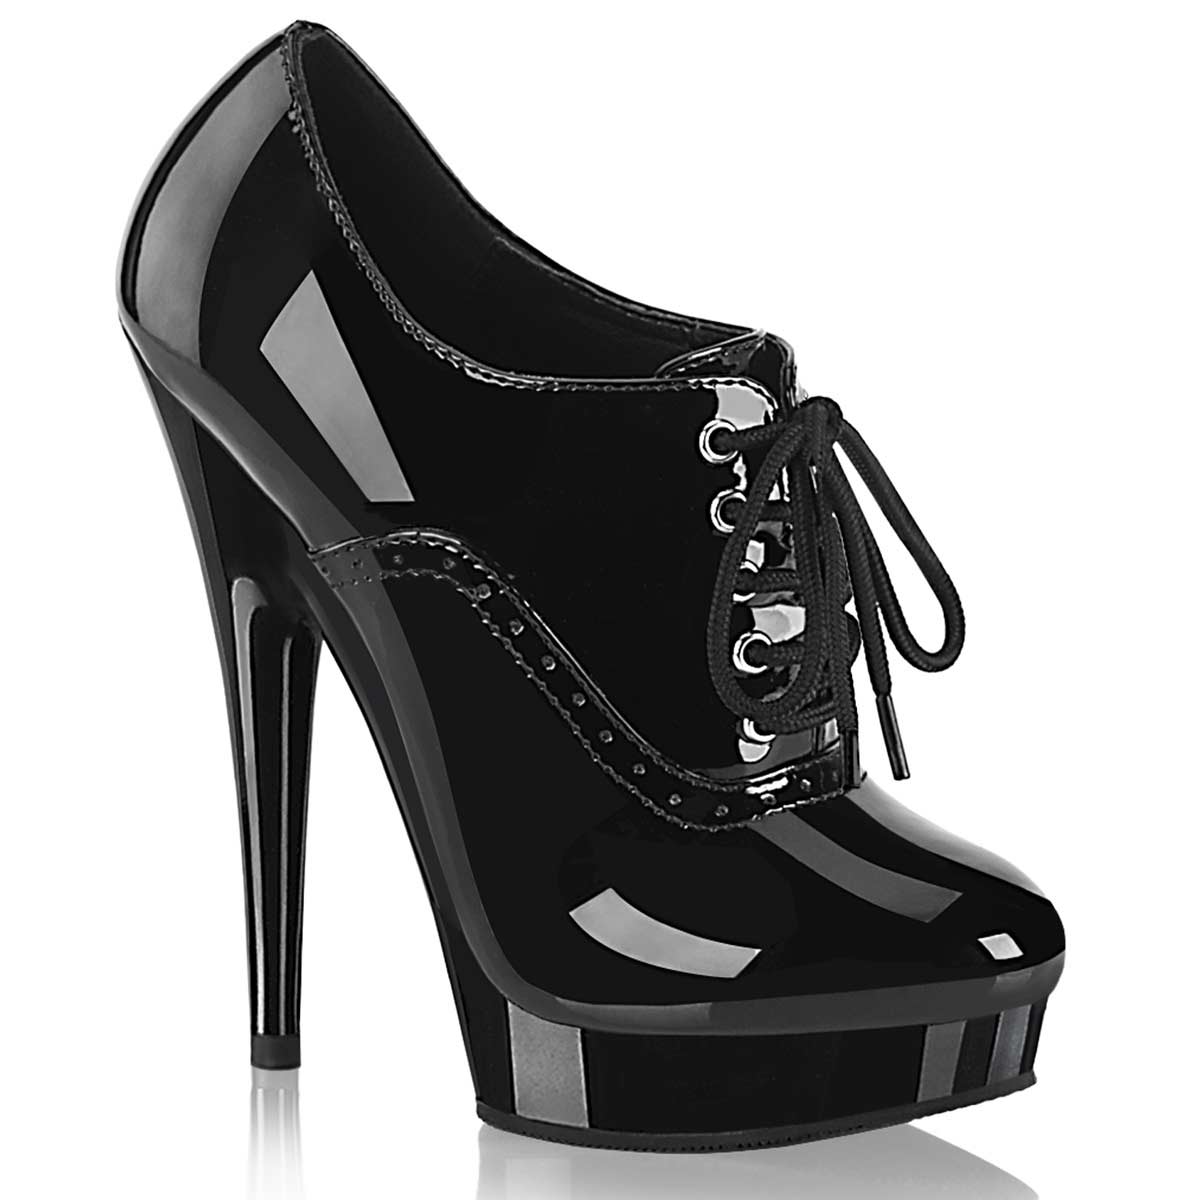 Pleaser Sultry-660 - Black Pat in Sexy Boots - $52.79